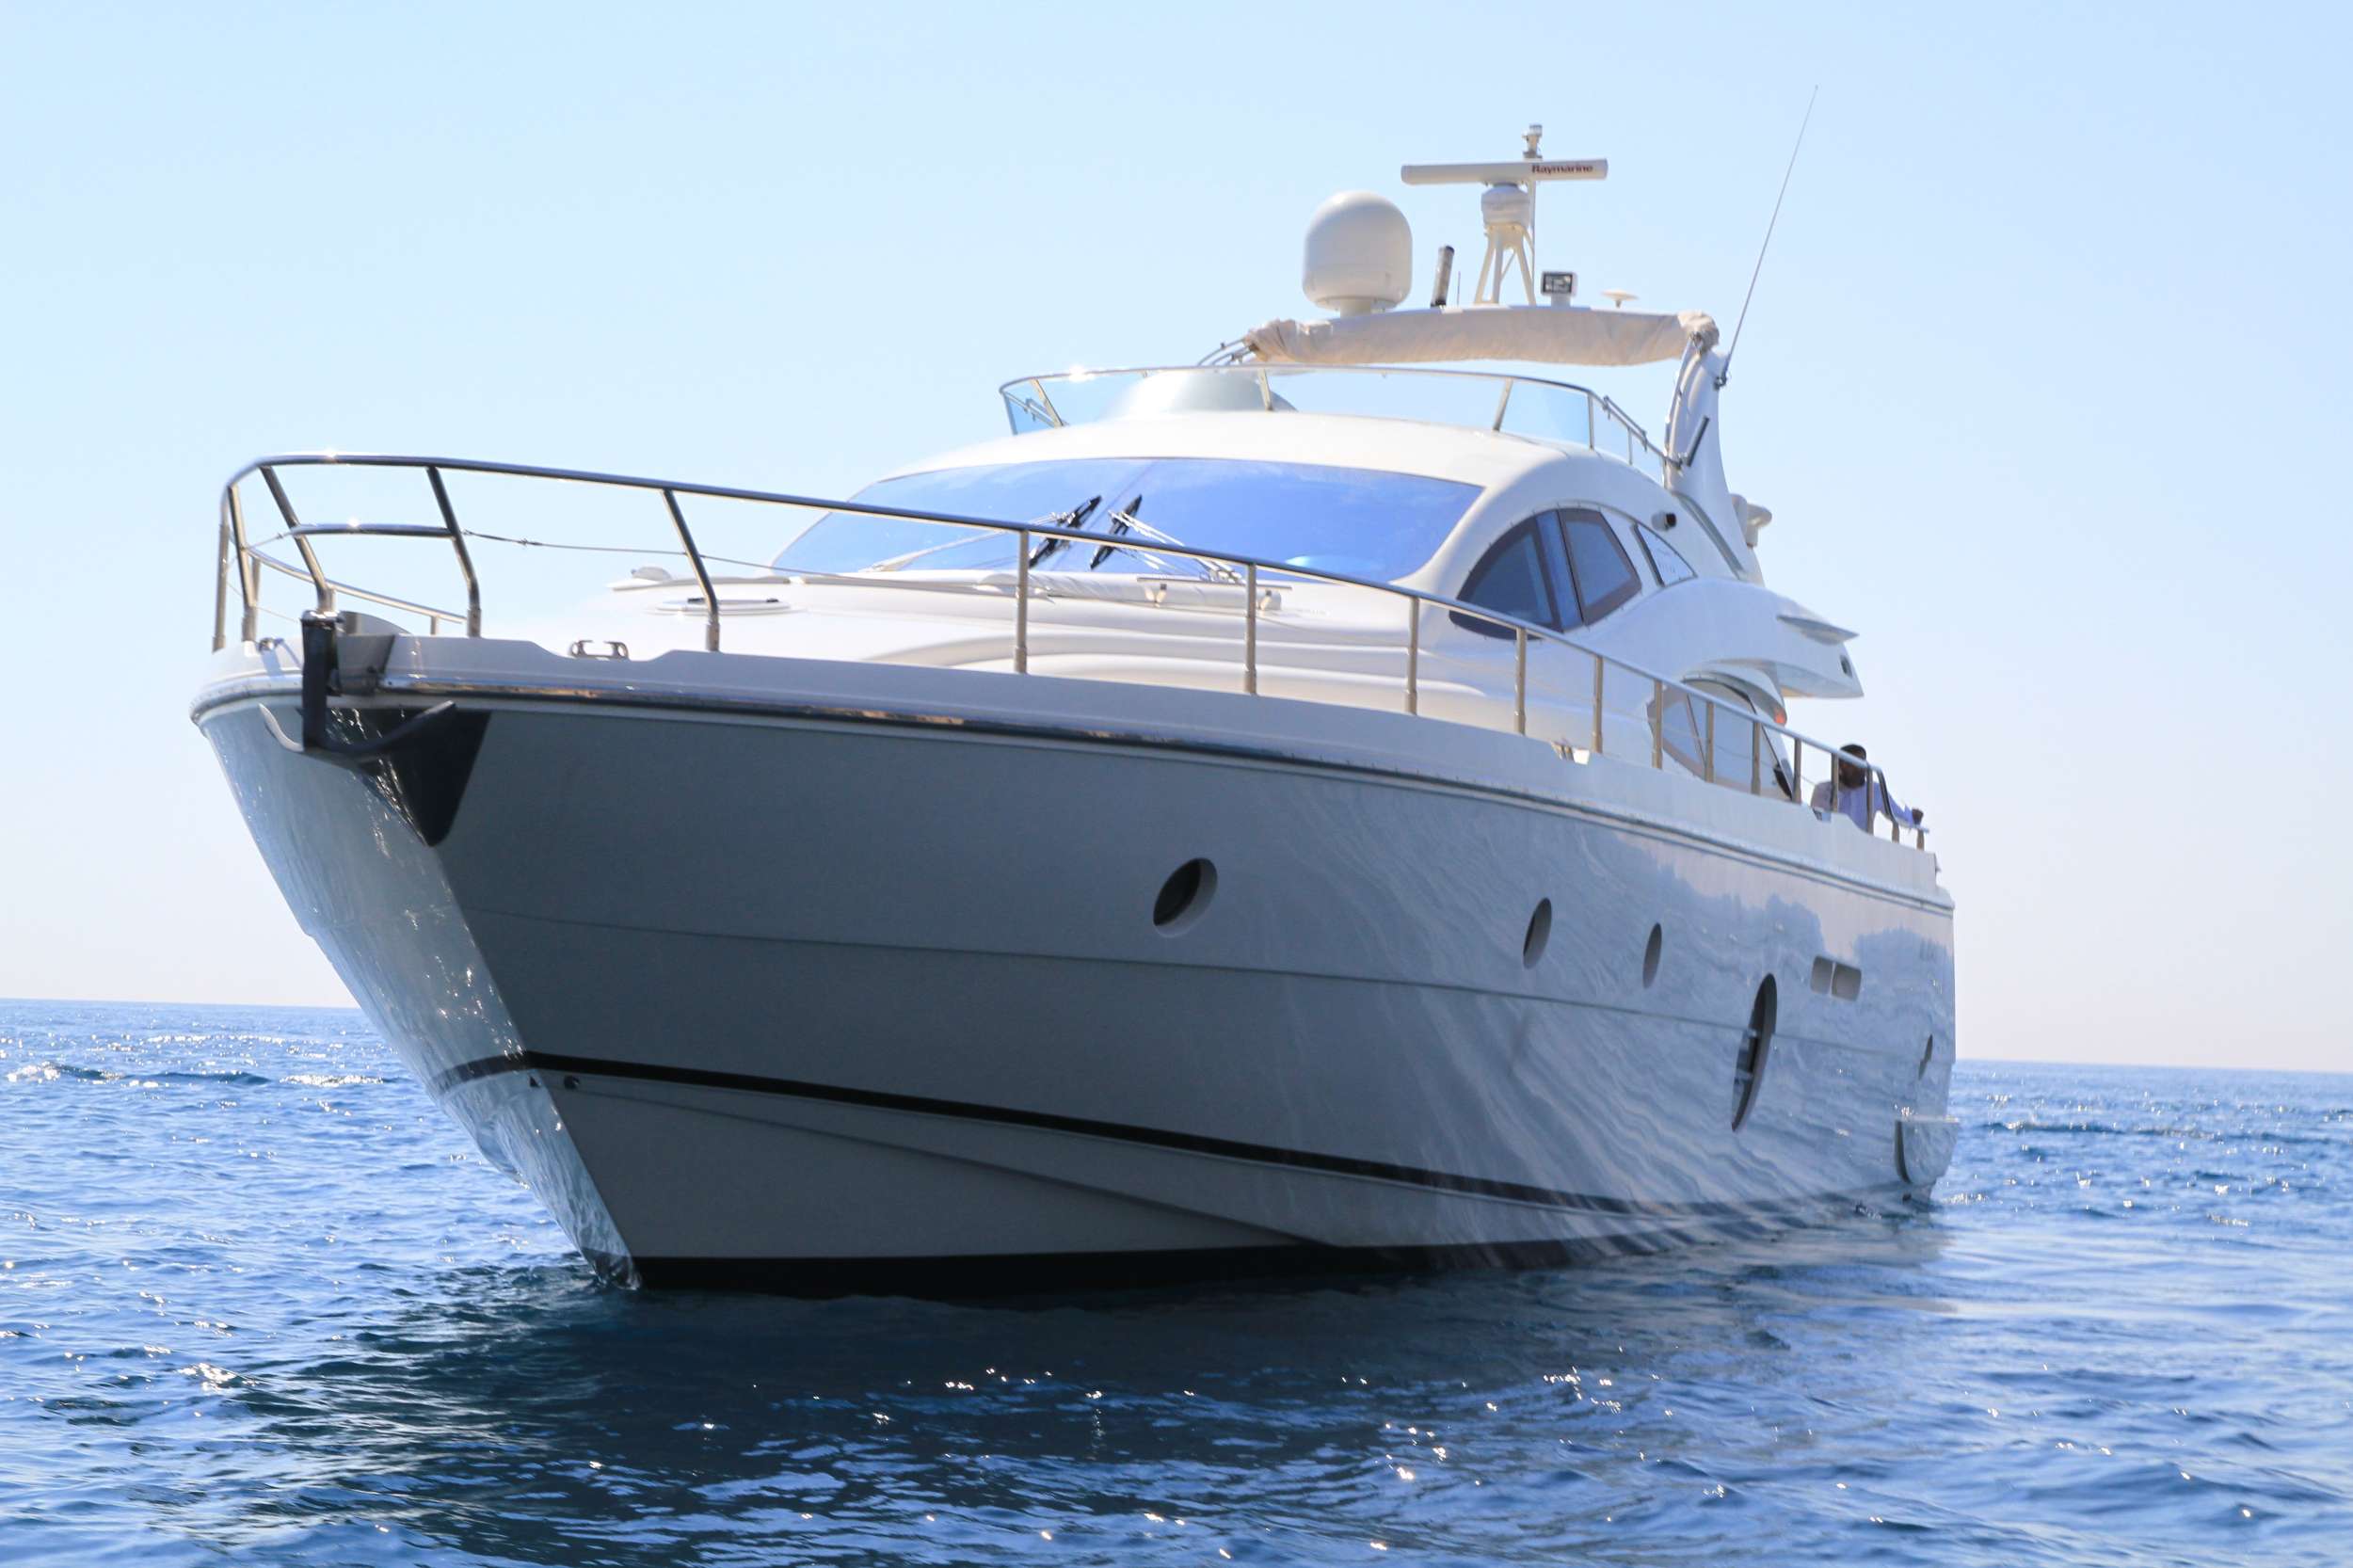 CINZIA - Yacht Charter Siracusa & Boat hire in Naples/Sicily 1